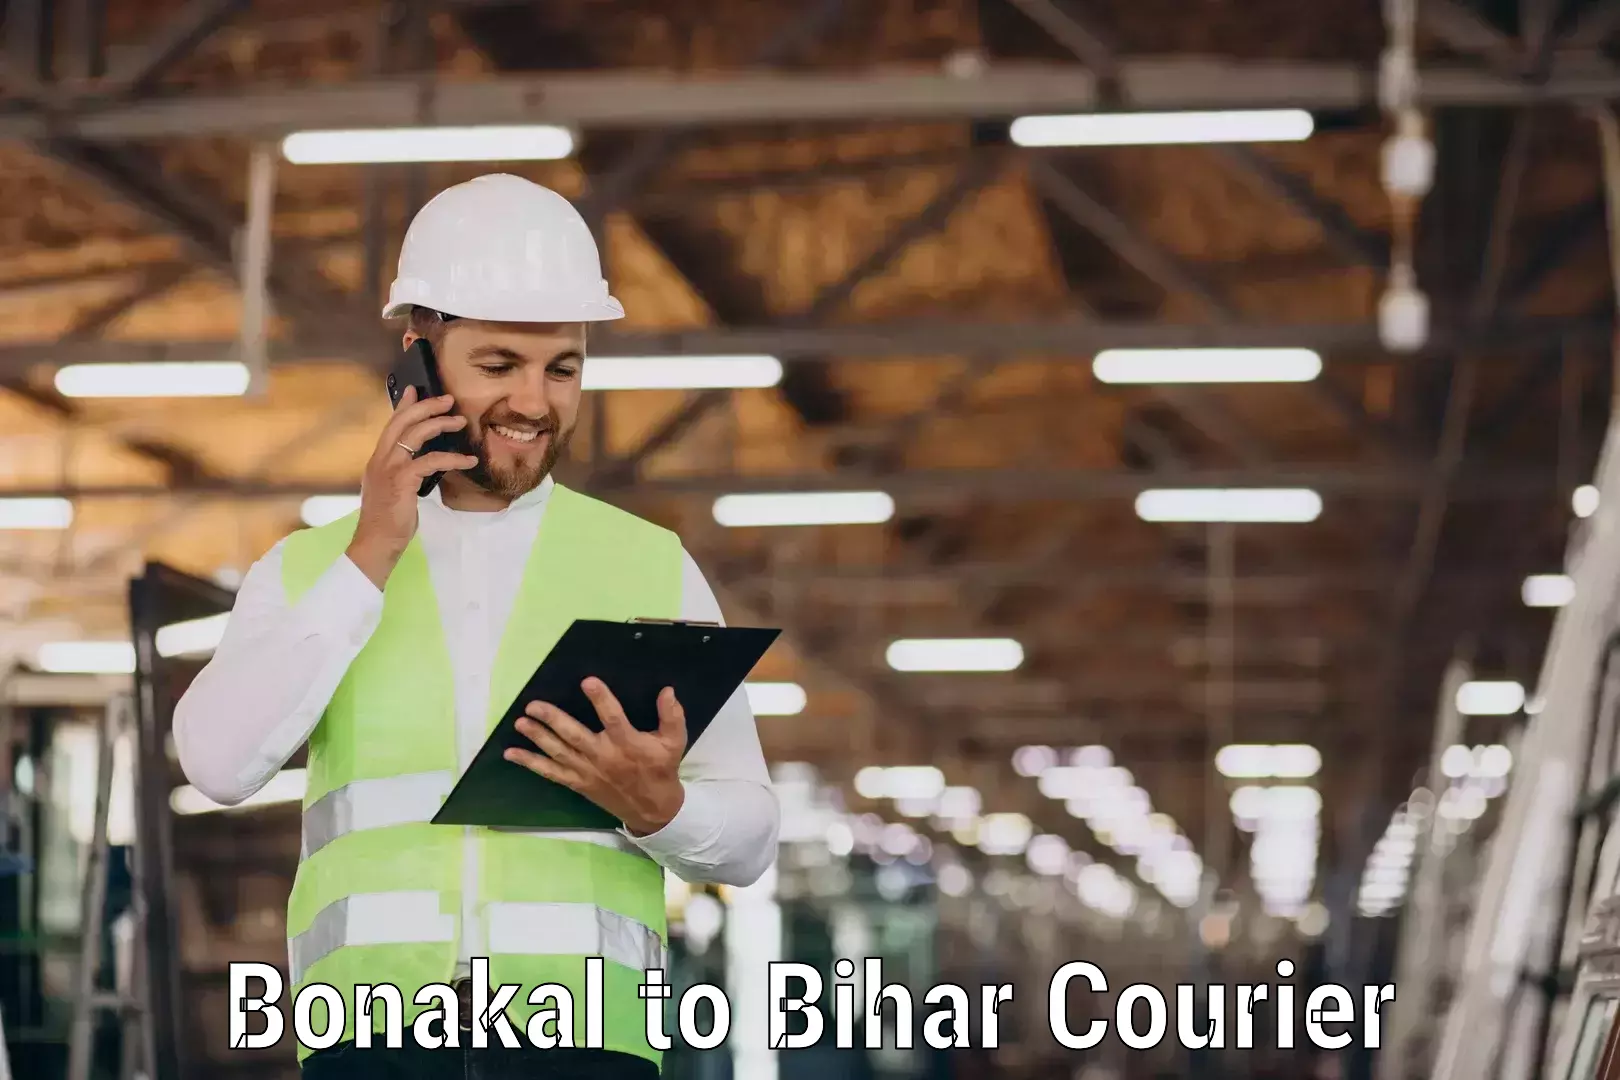 Next-day delivery options Bonakal to Bihar